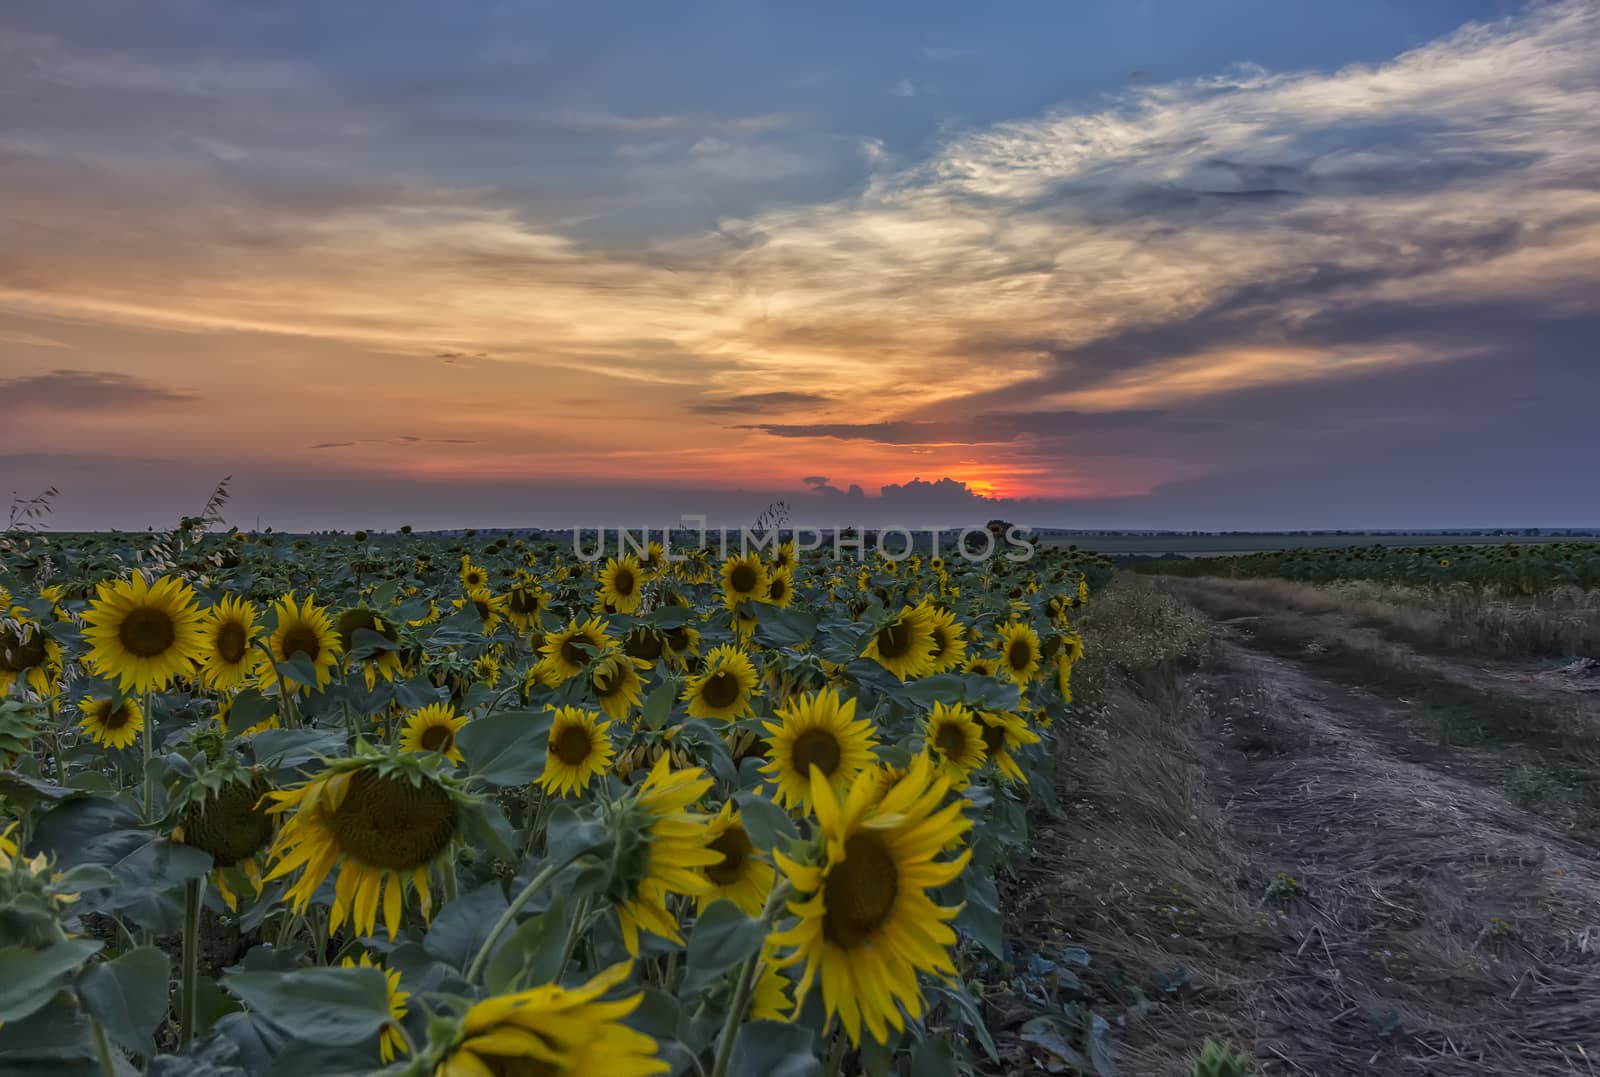 Summer landscape with field of sunflowers and dirt road. Rural landscape of empty road near sunflower field at sunset